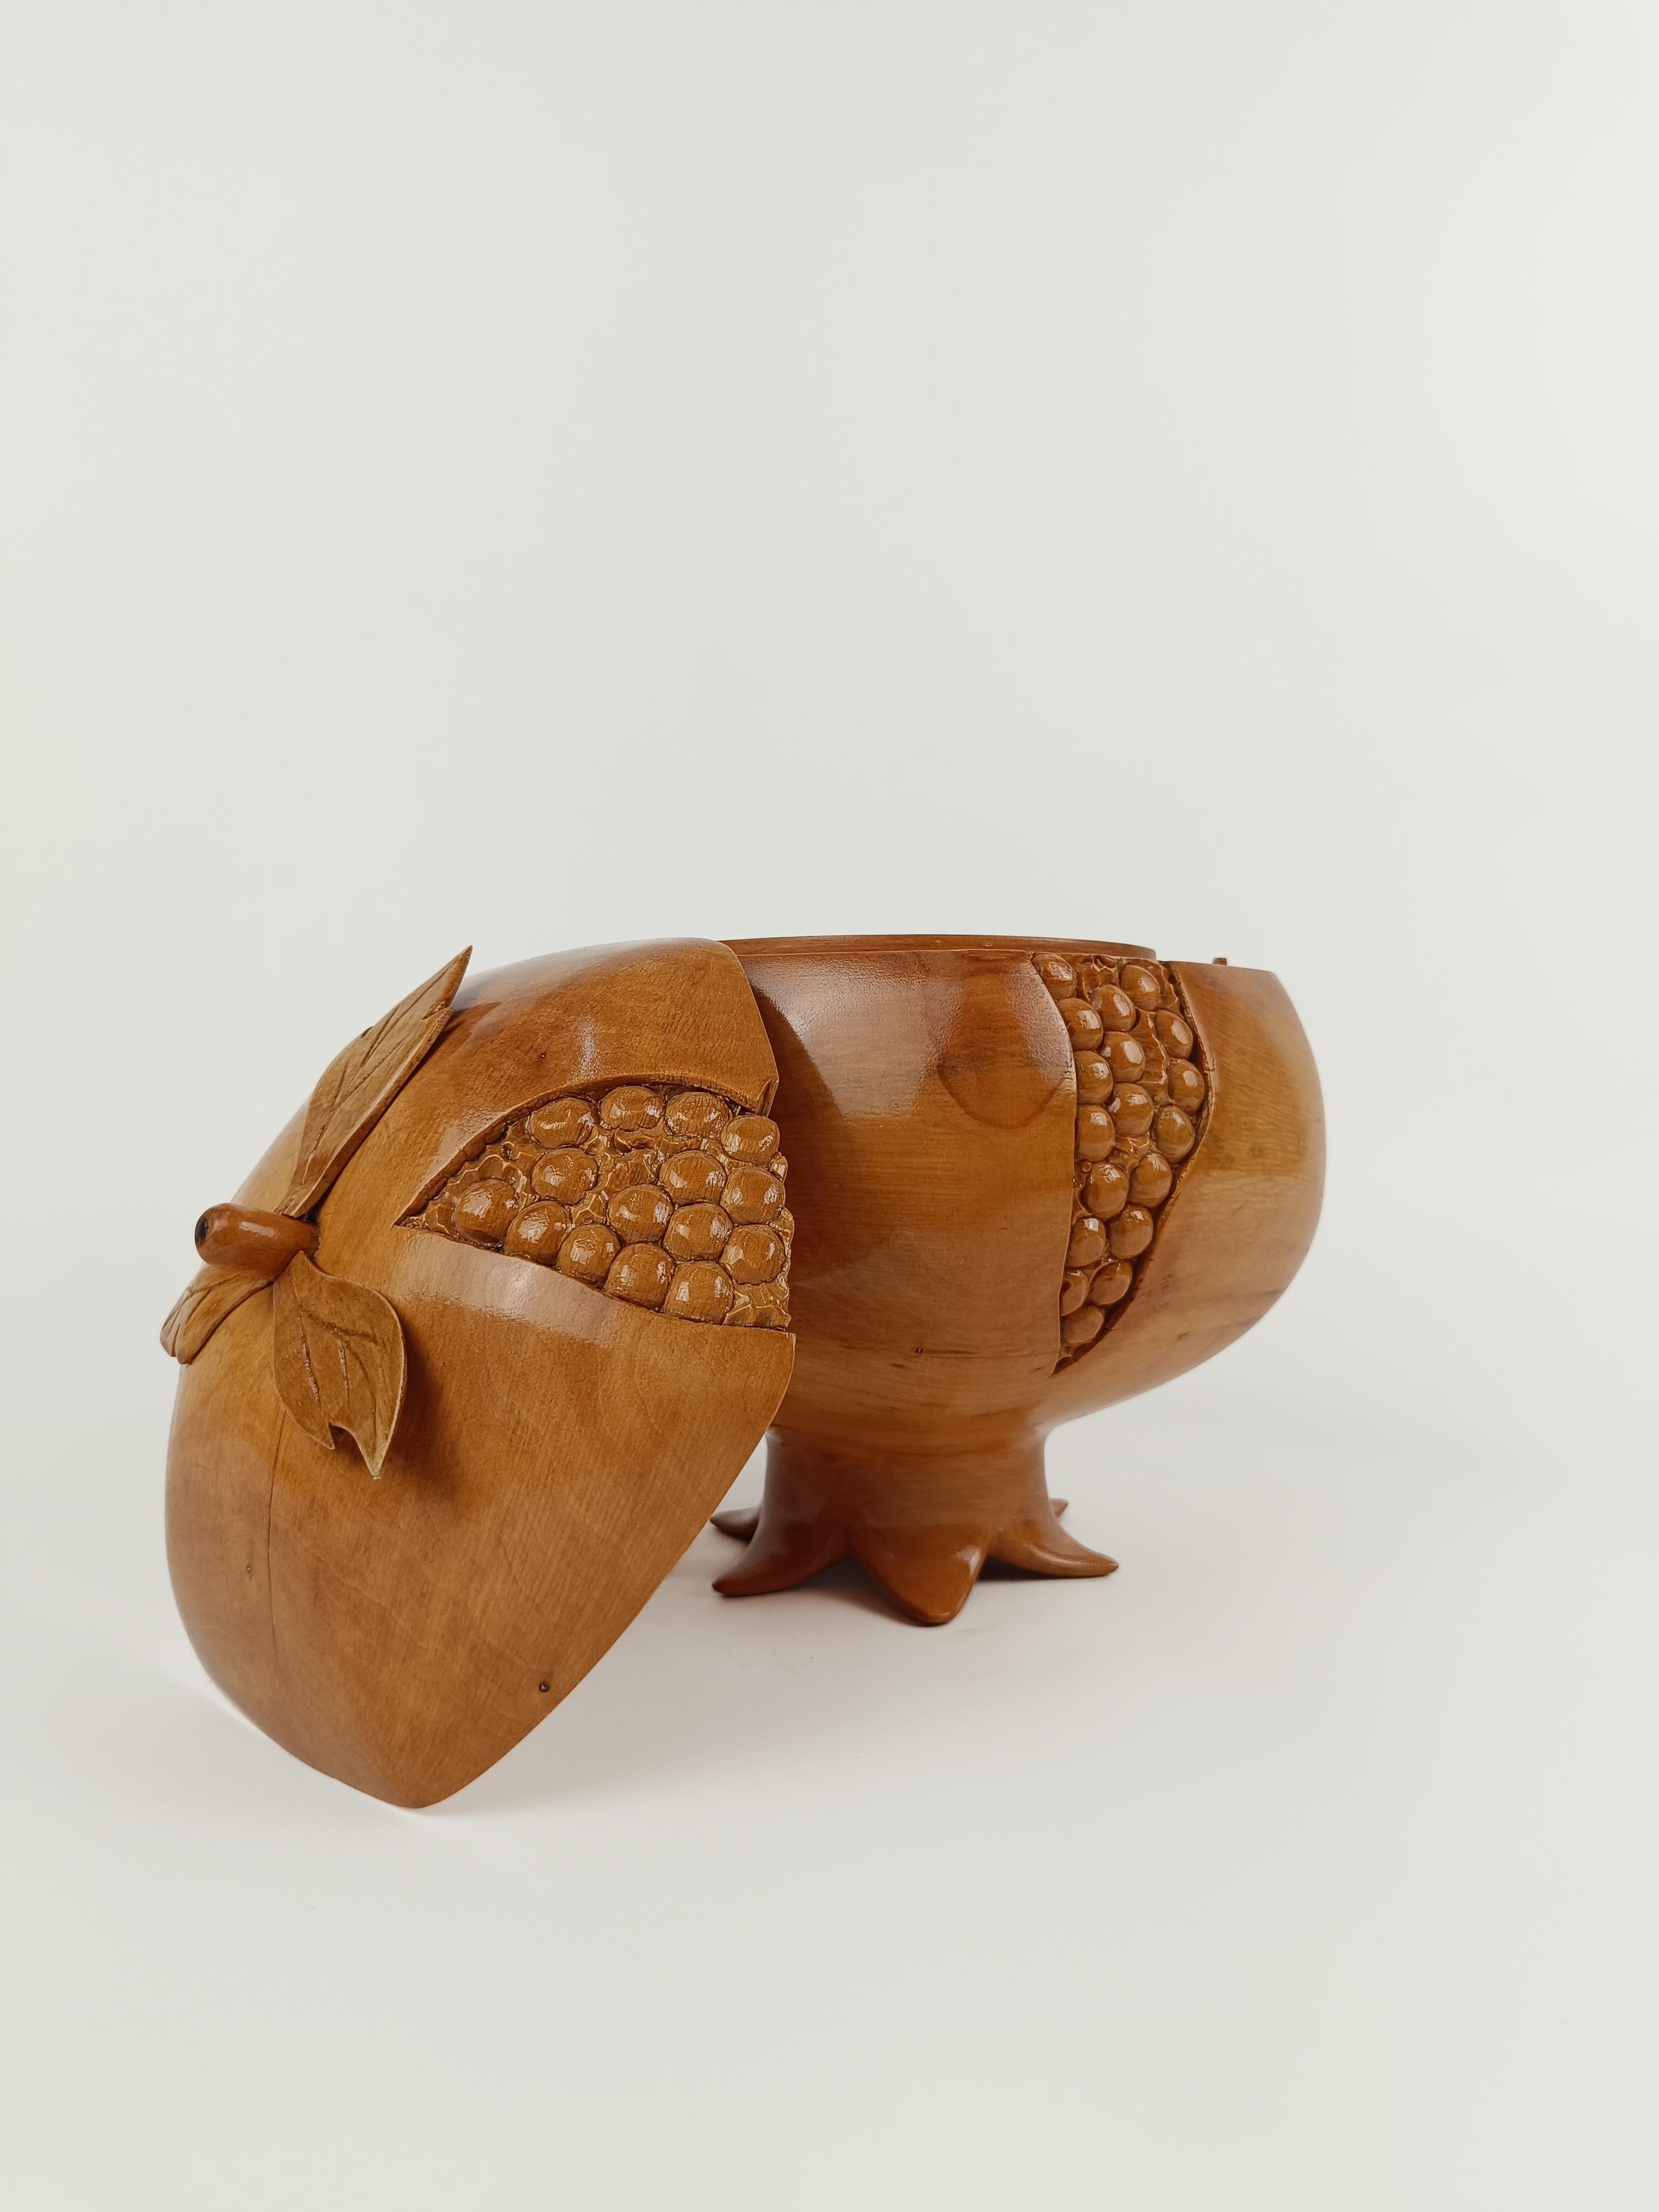 Sculptural Vintage Ice Bucket in maple wood carved in the shape of a pomegranate For Sale 1